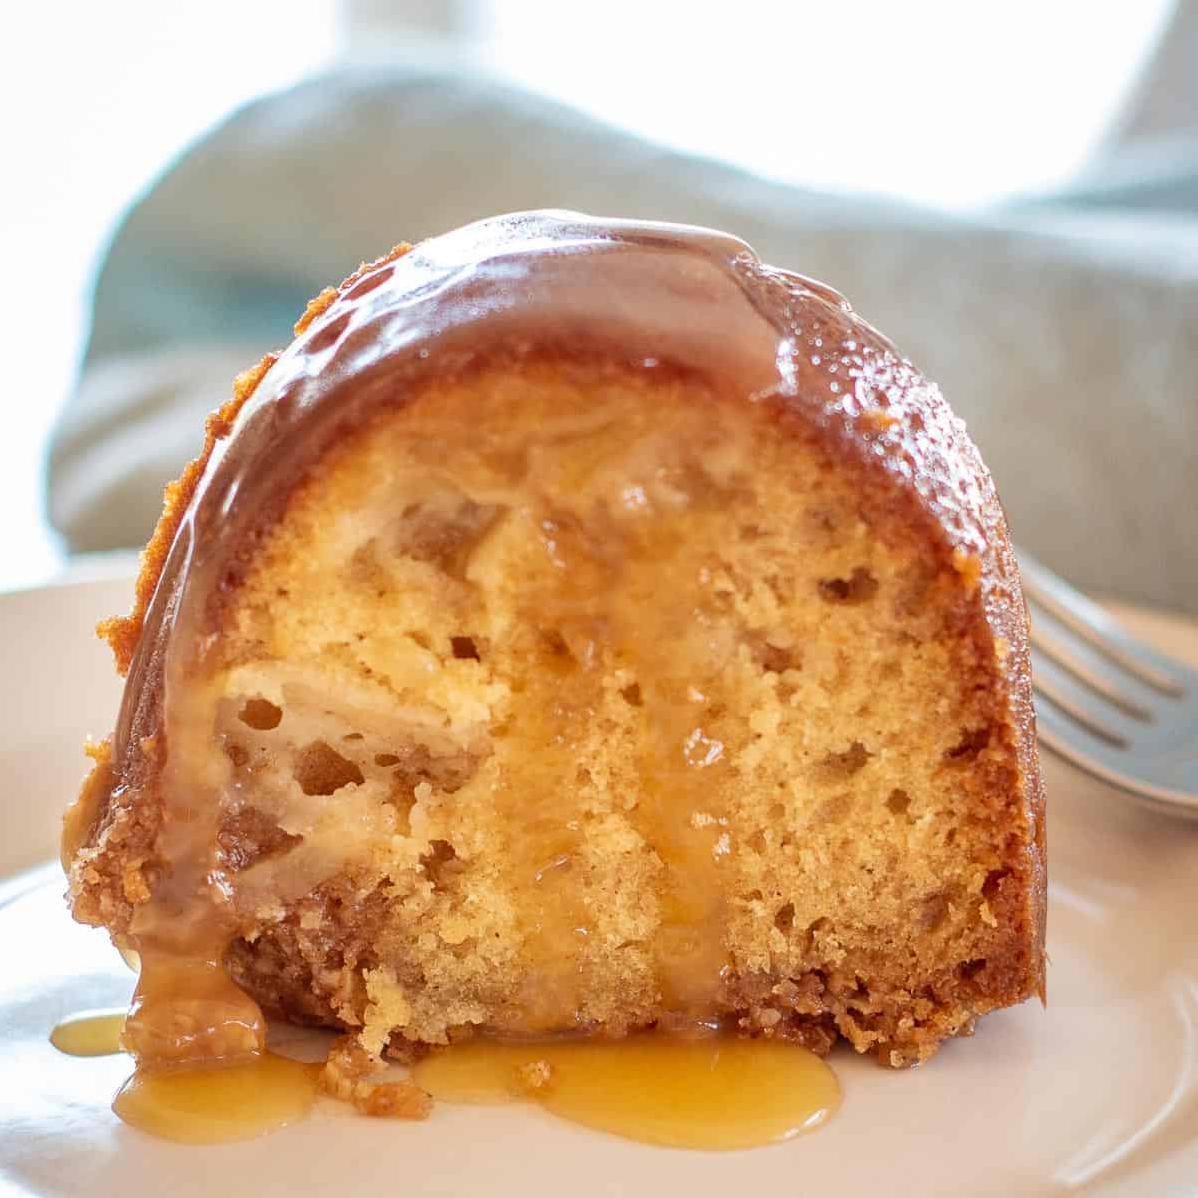  You won't believe how easy it is to whip up this Apple Pound Cake!